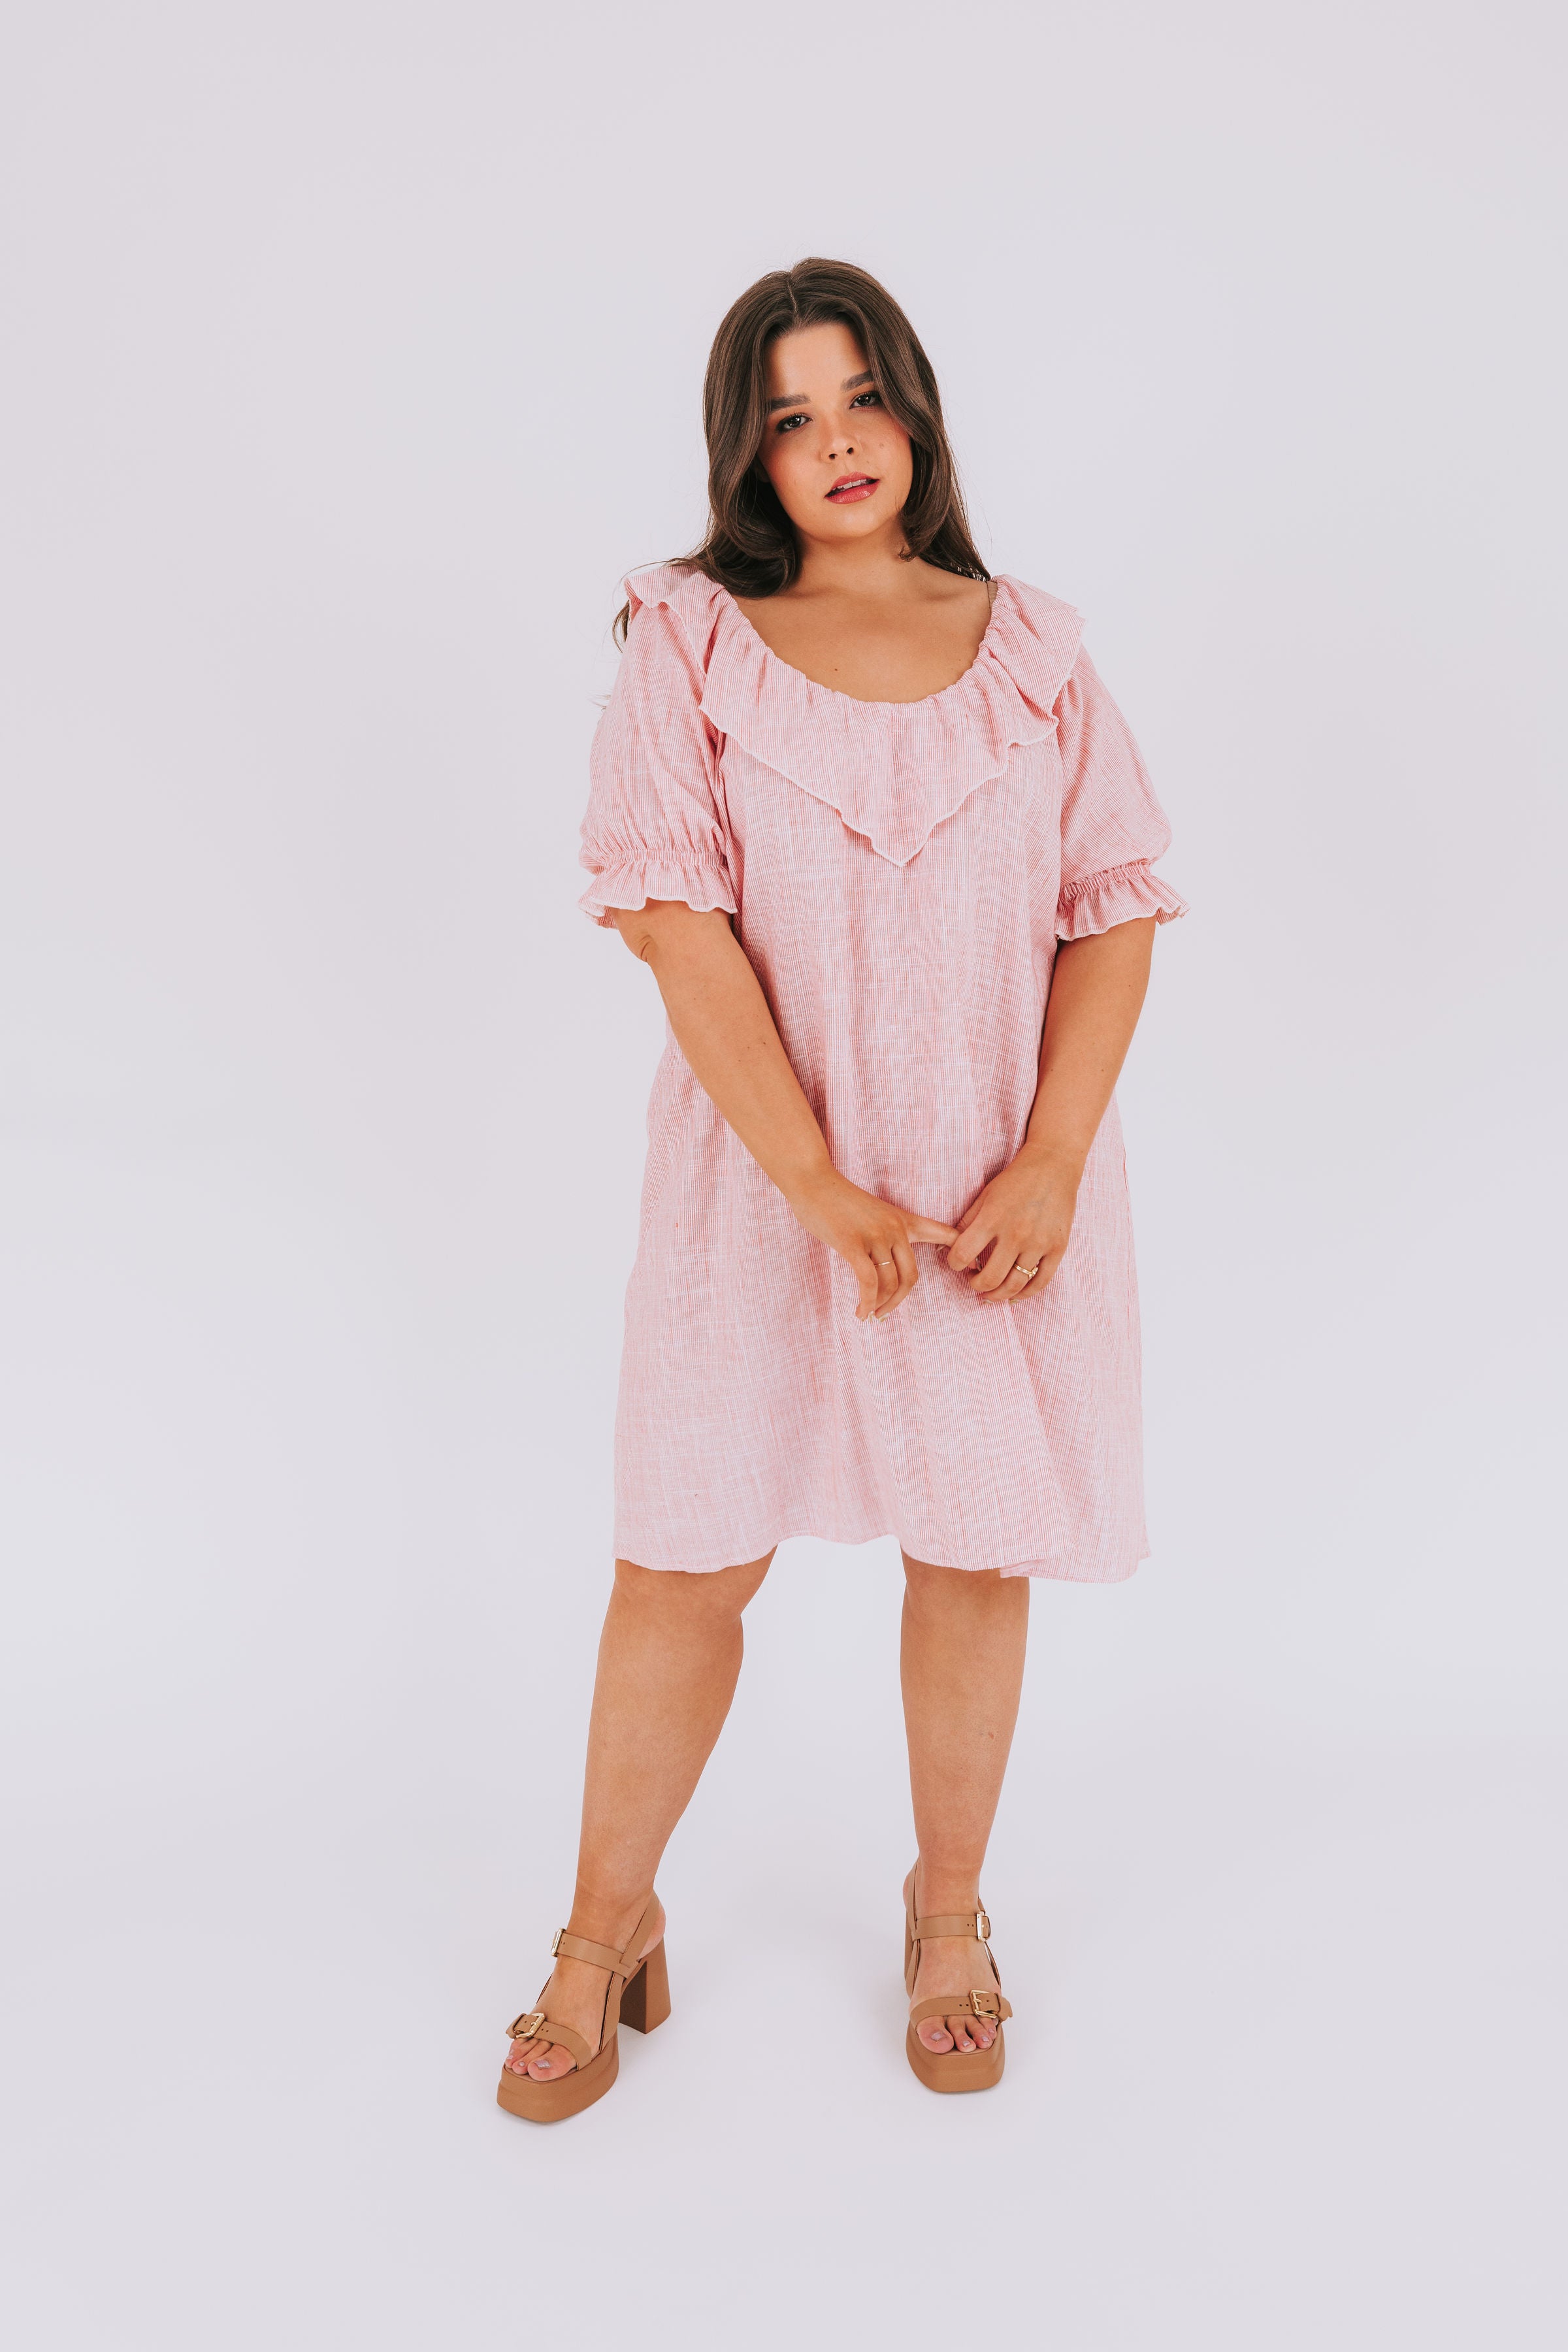 PLUS SIZE - Falling For You Dress